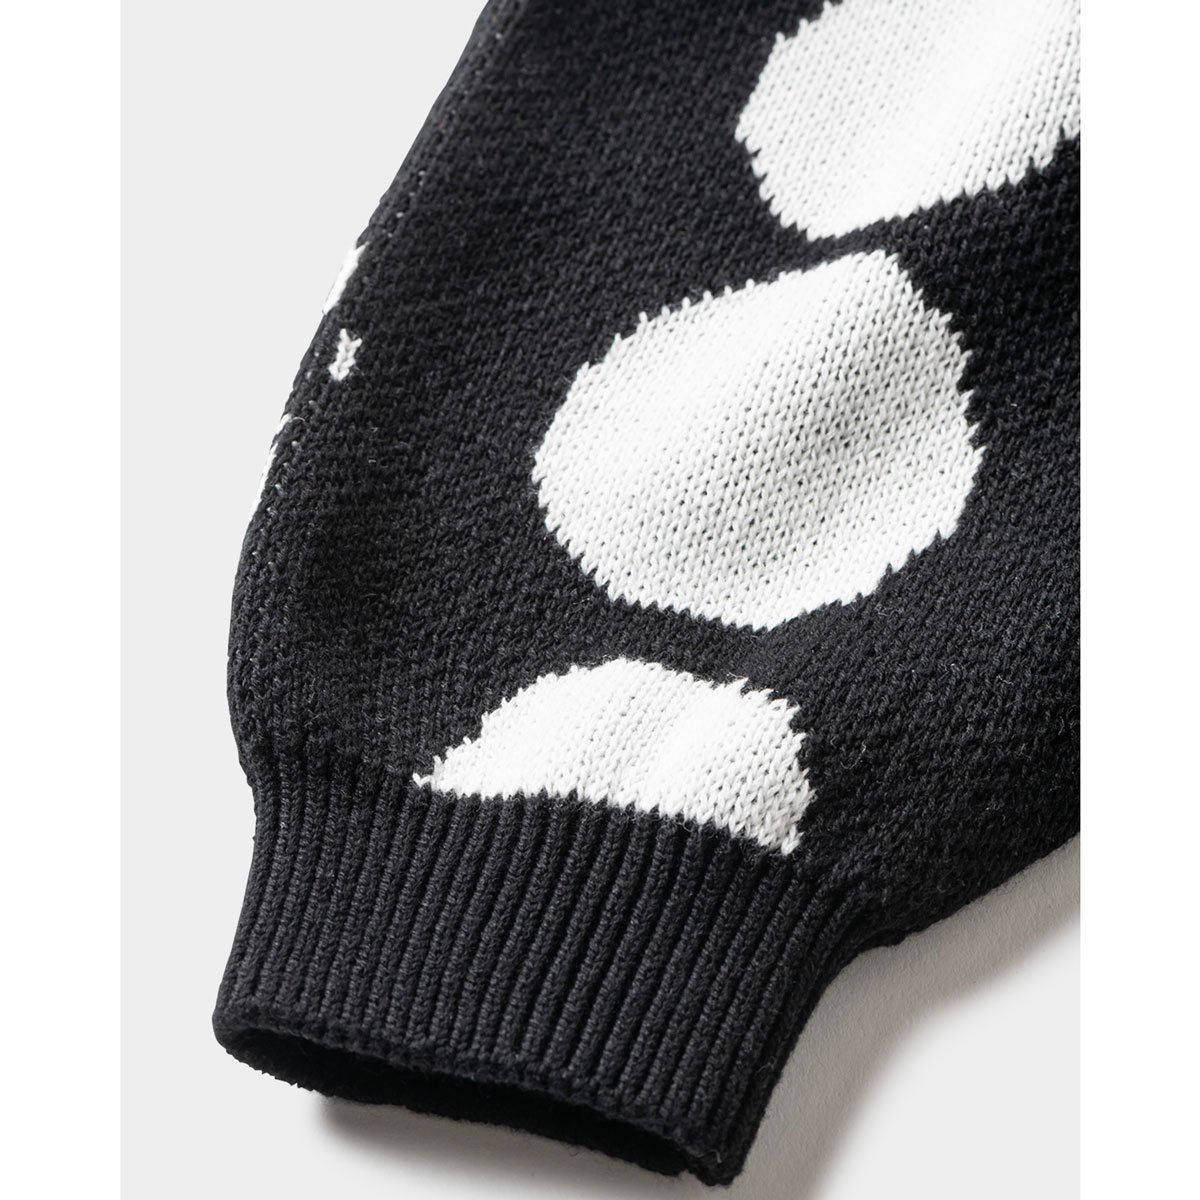 TIGHTBOOTH - COVID-19 KNIT SWEATER - SHRED